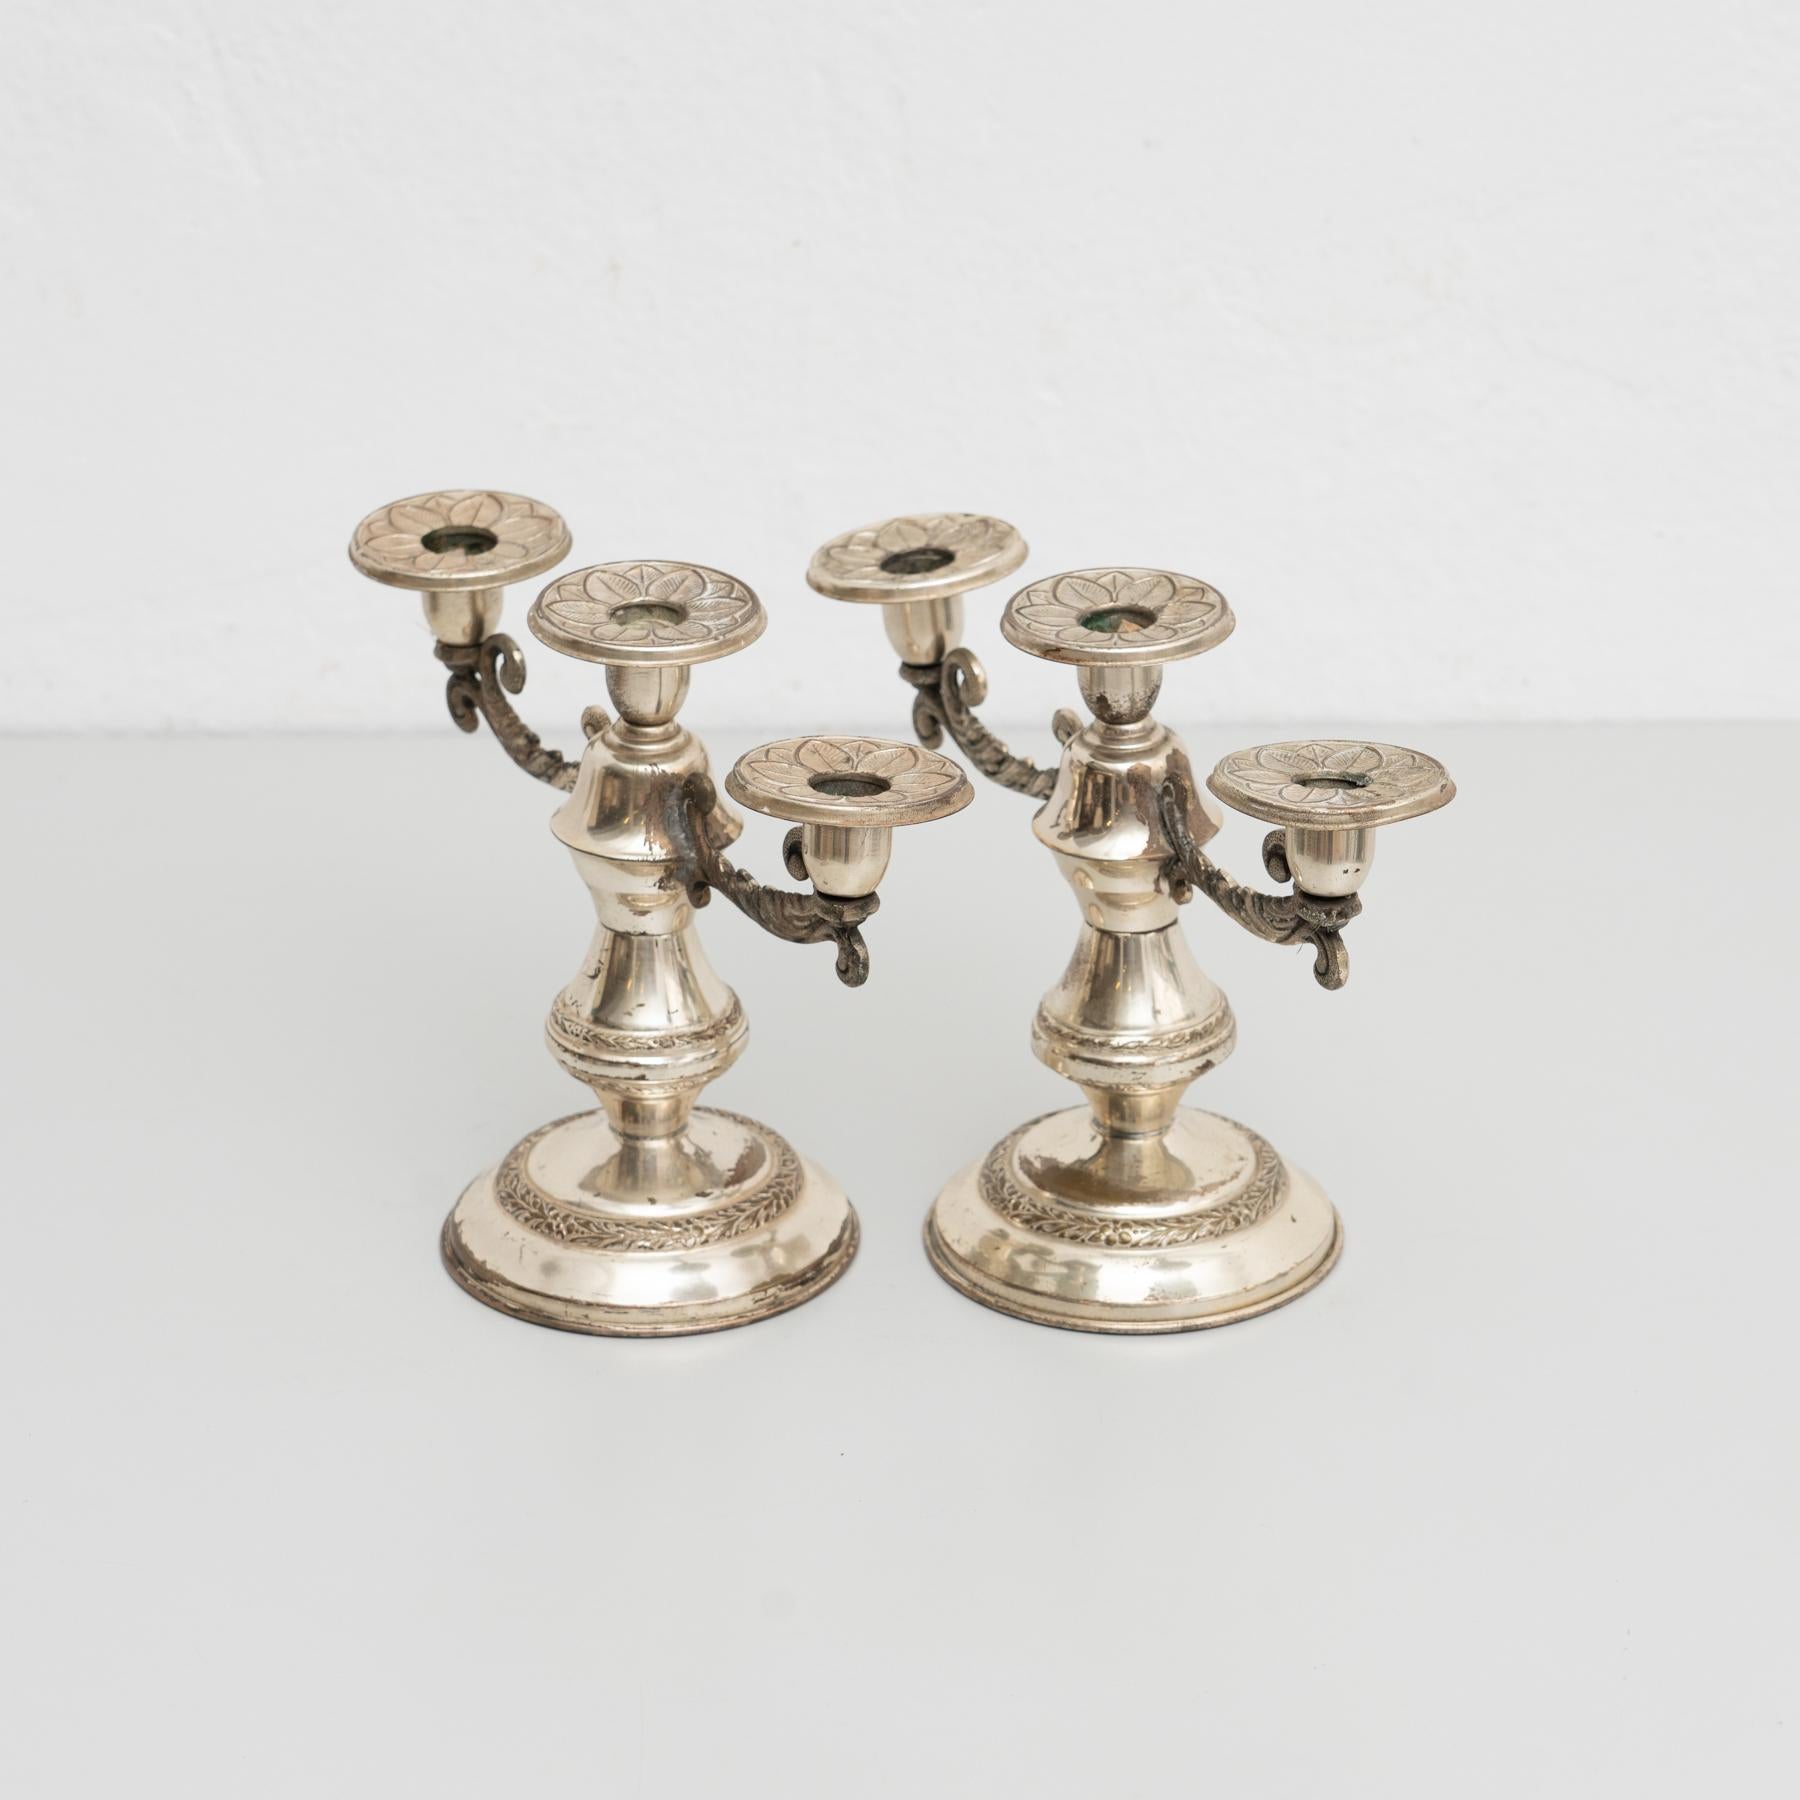 Set of 2 Antique Metal Chandeliers, circa 1950 For Sale 9